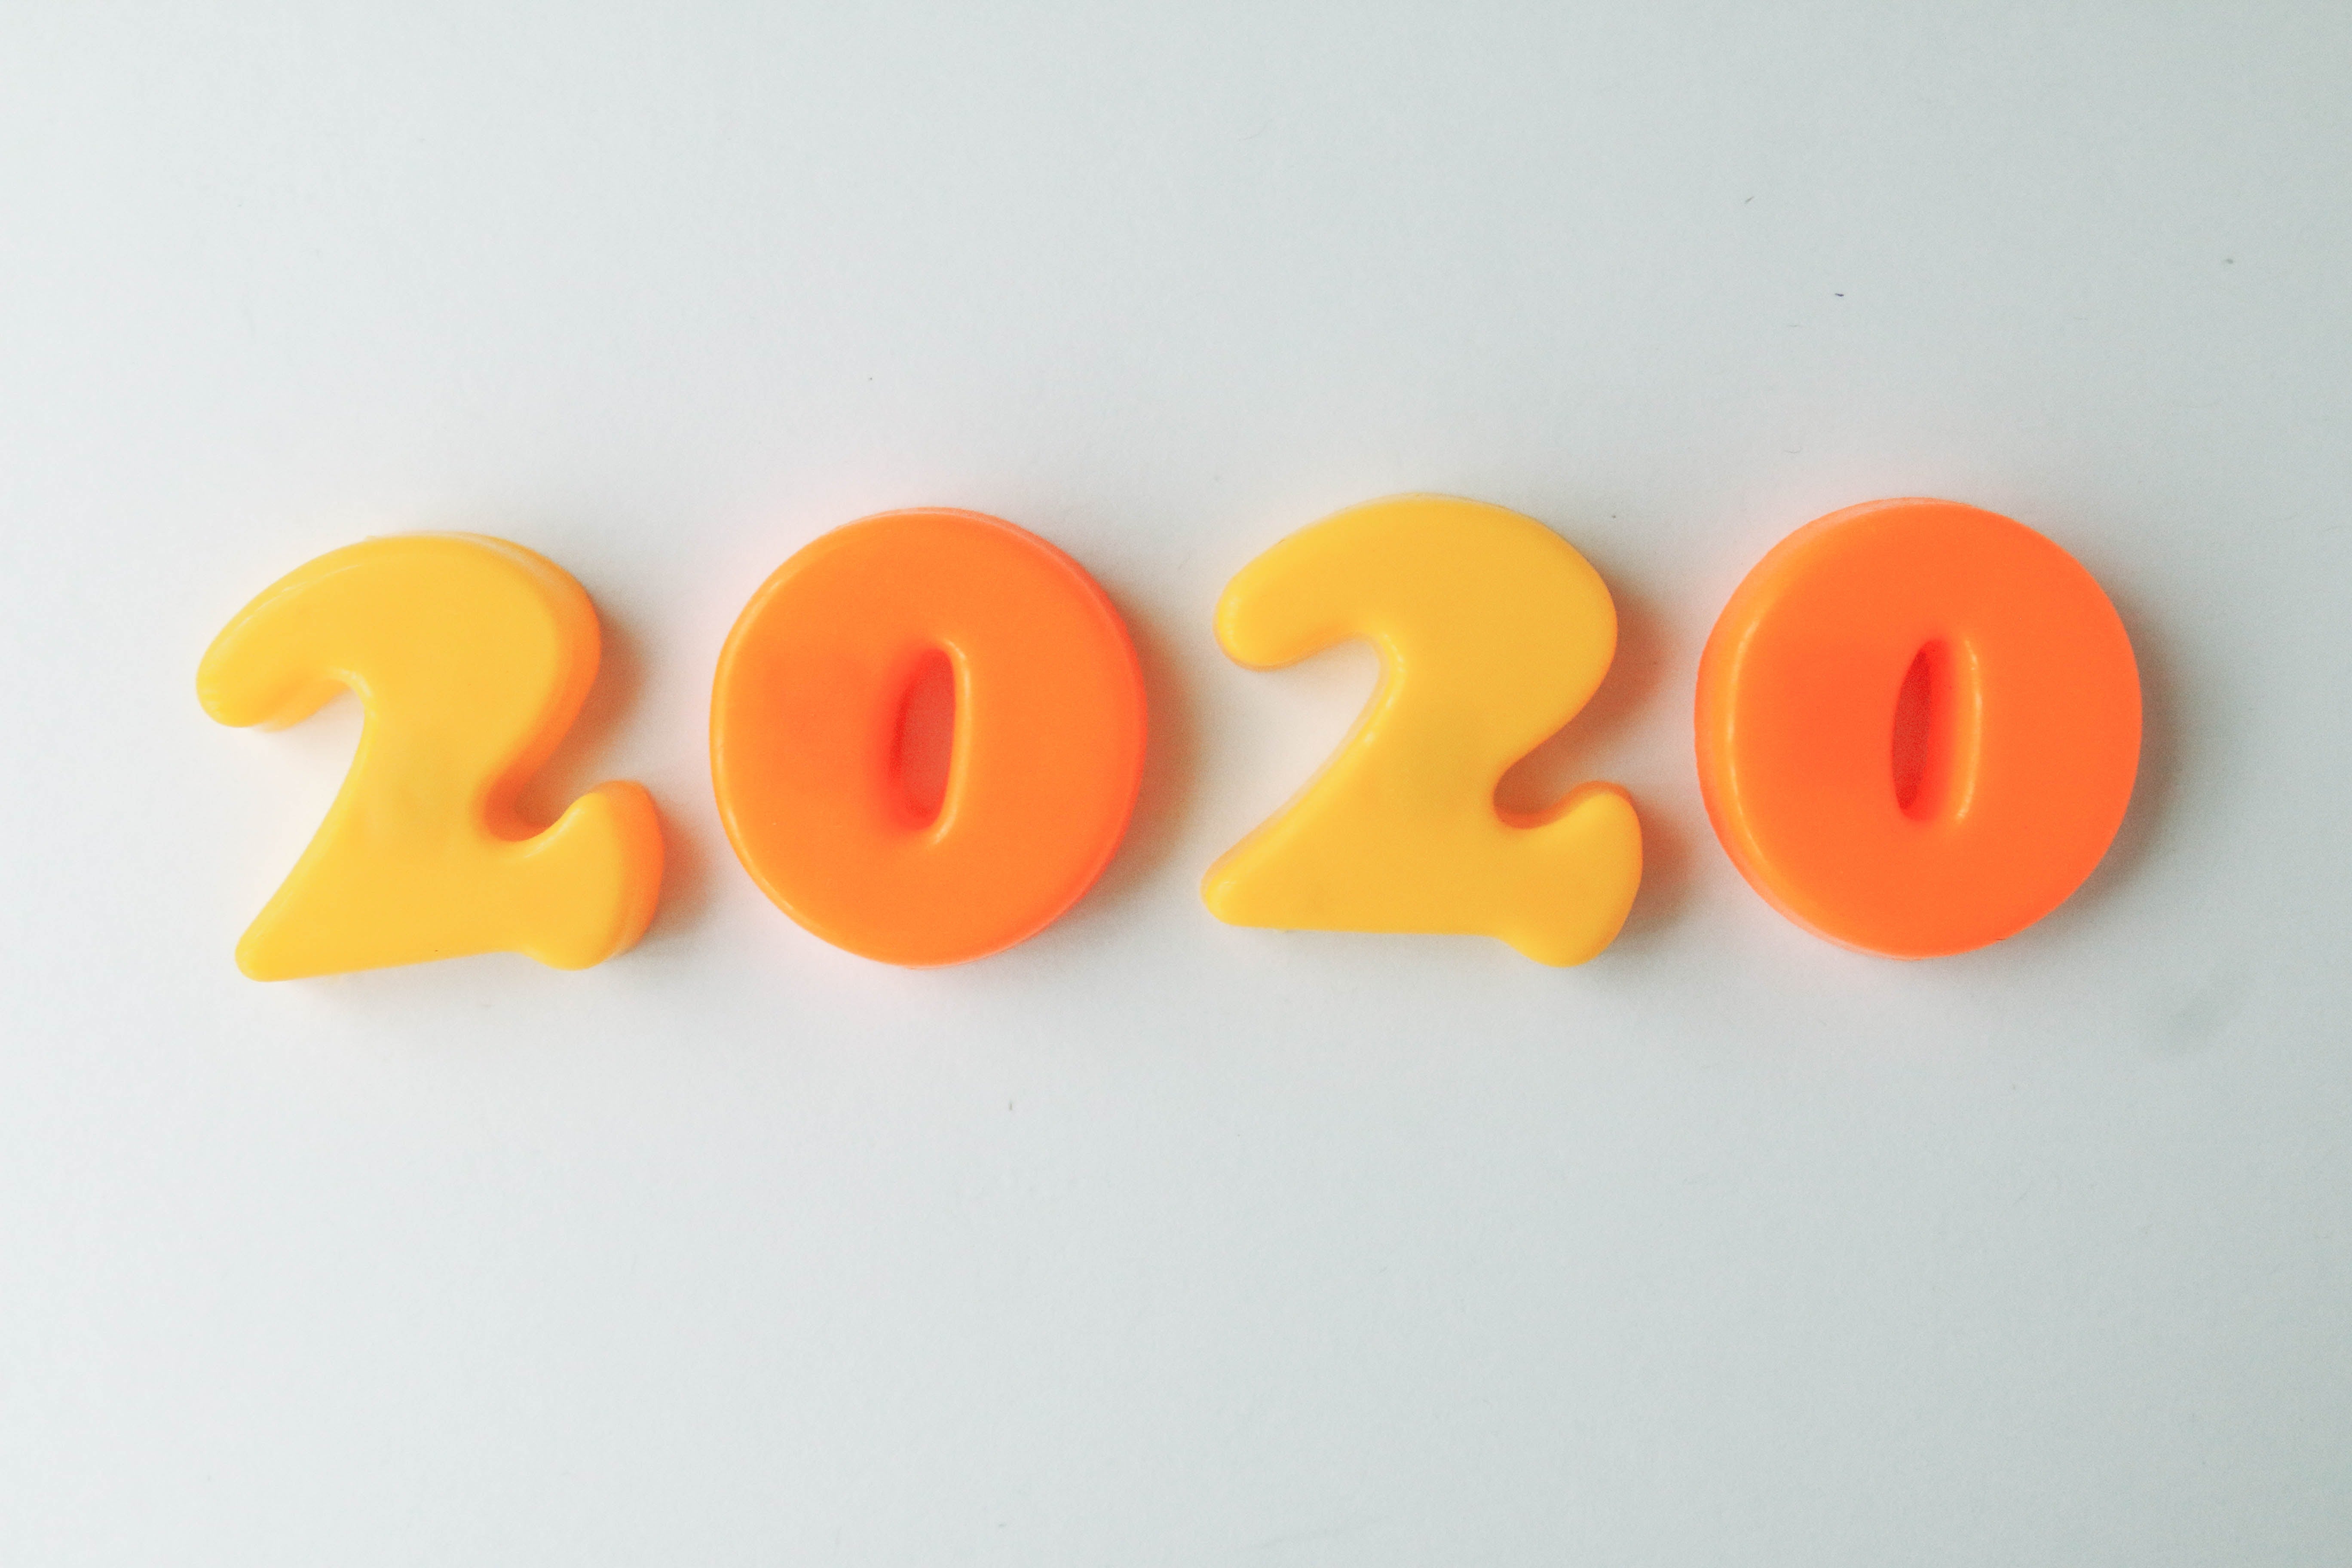 Fridge magnets spelling out 2020